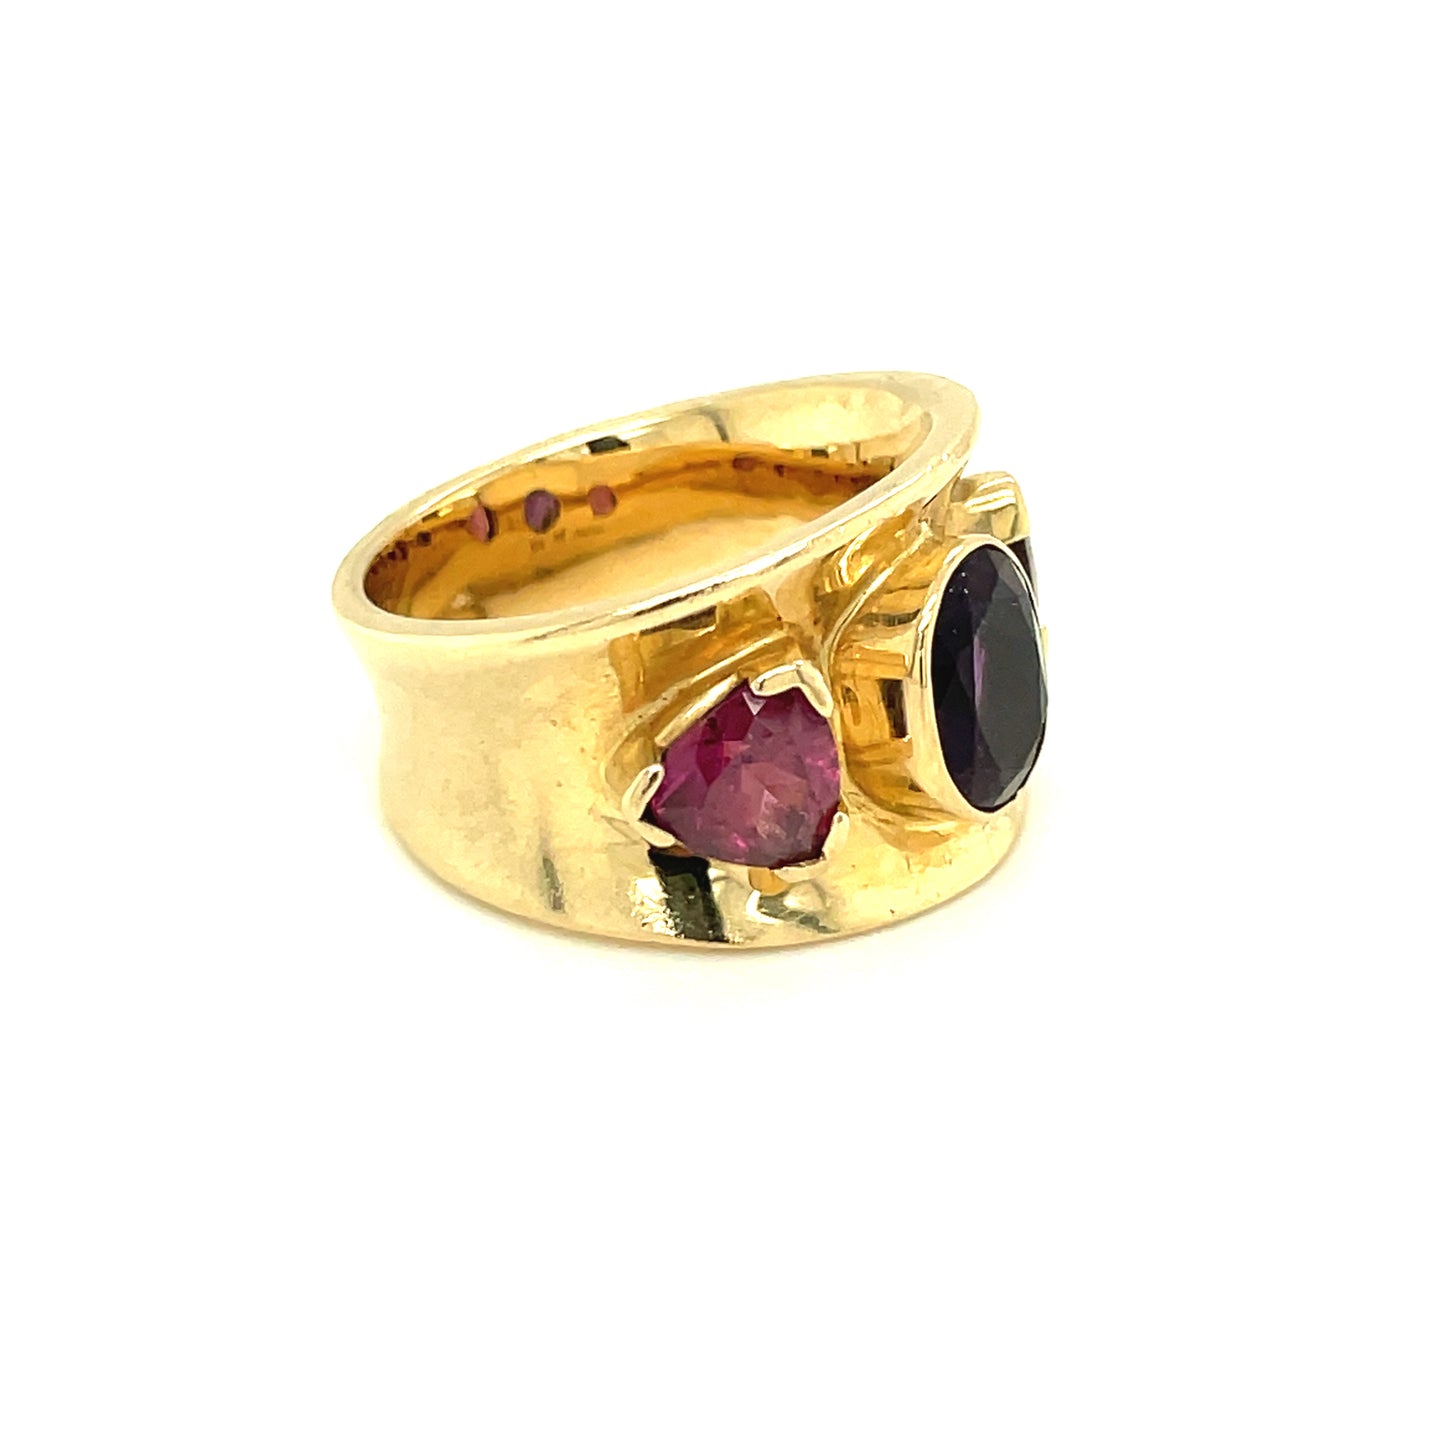 Vintage 14k Yellow Gold Amethyst and Garnet Ring 11.1 Grams Size 6.5